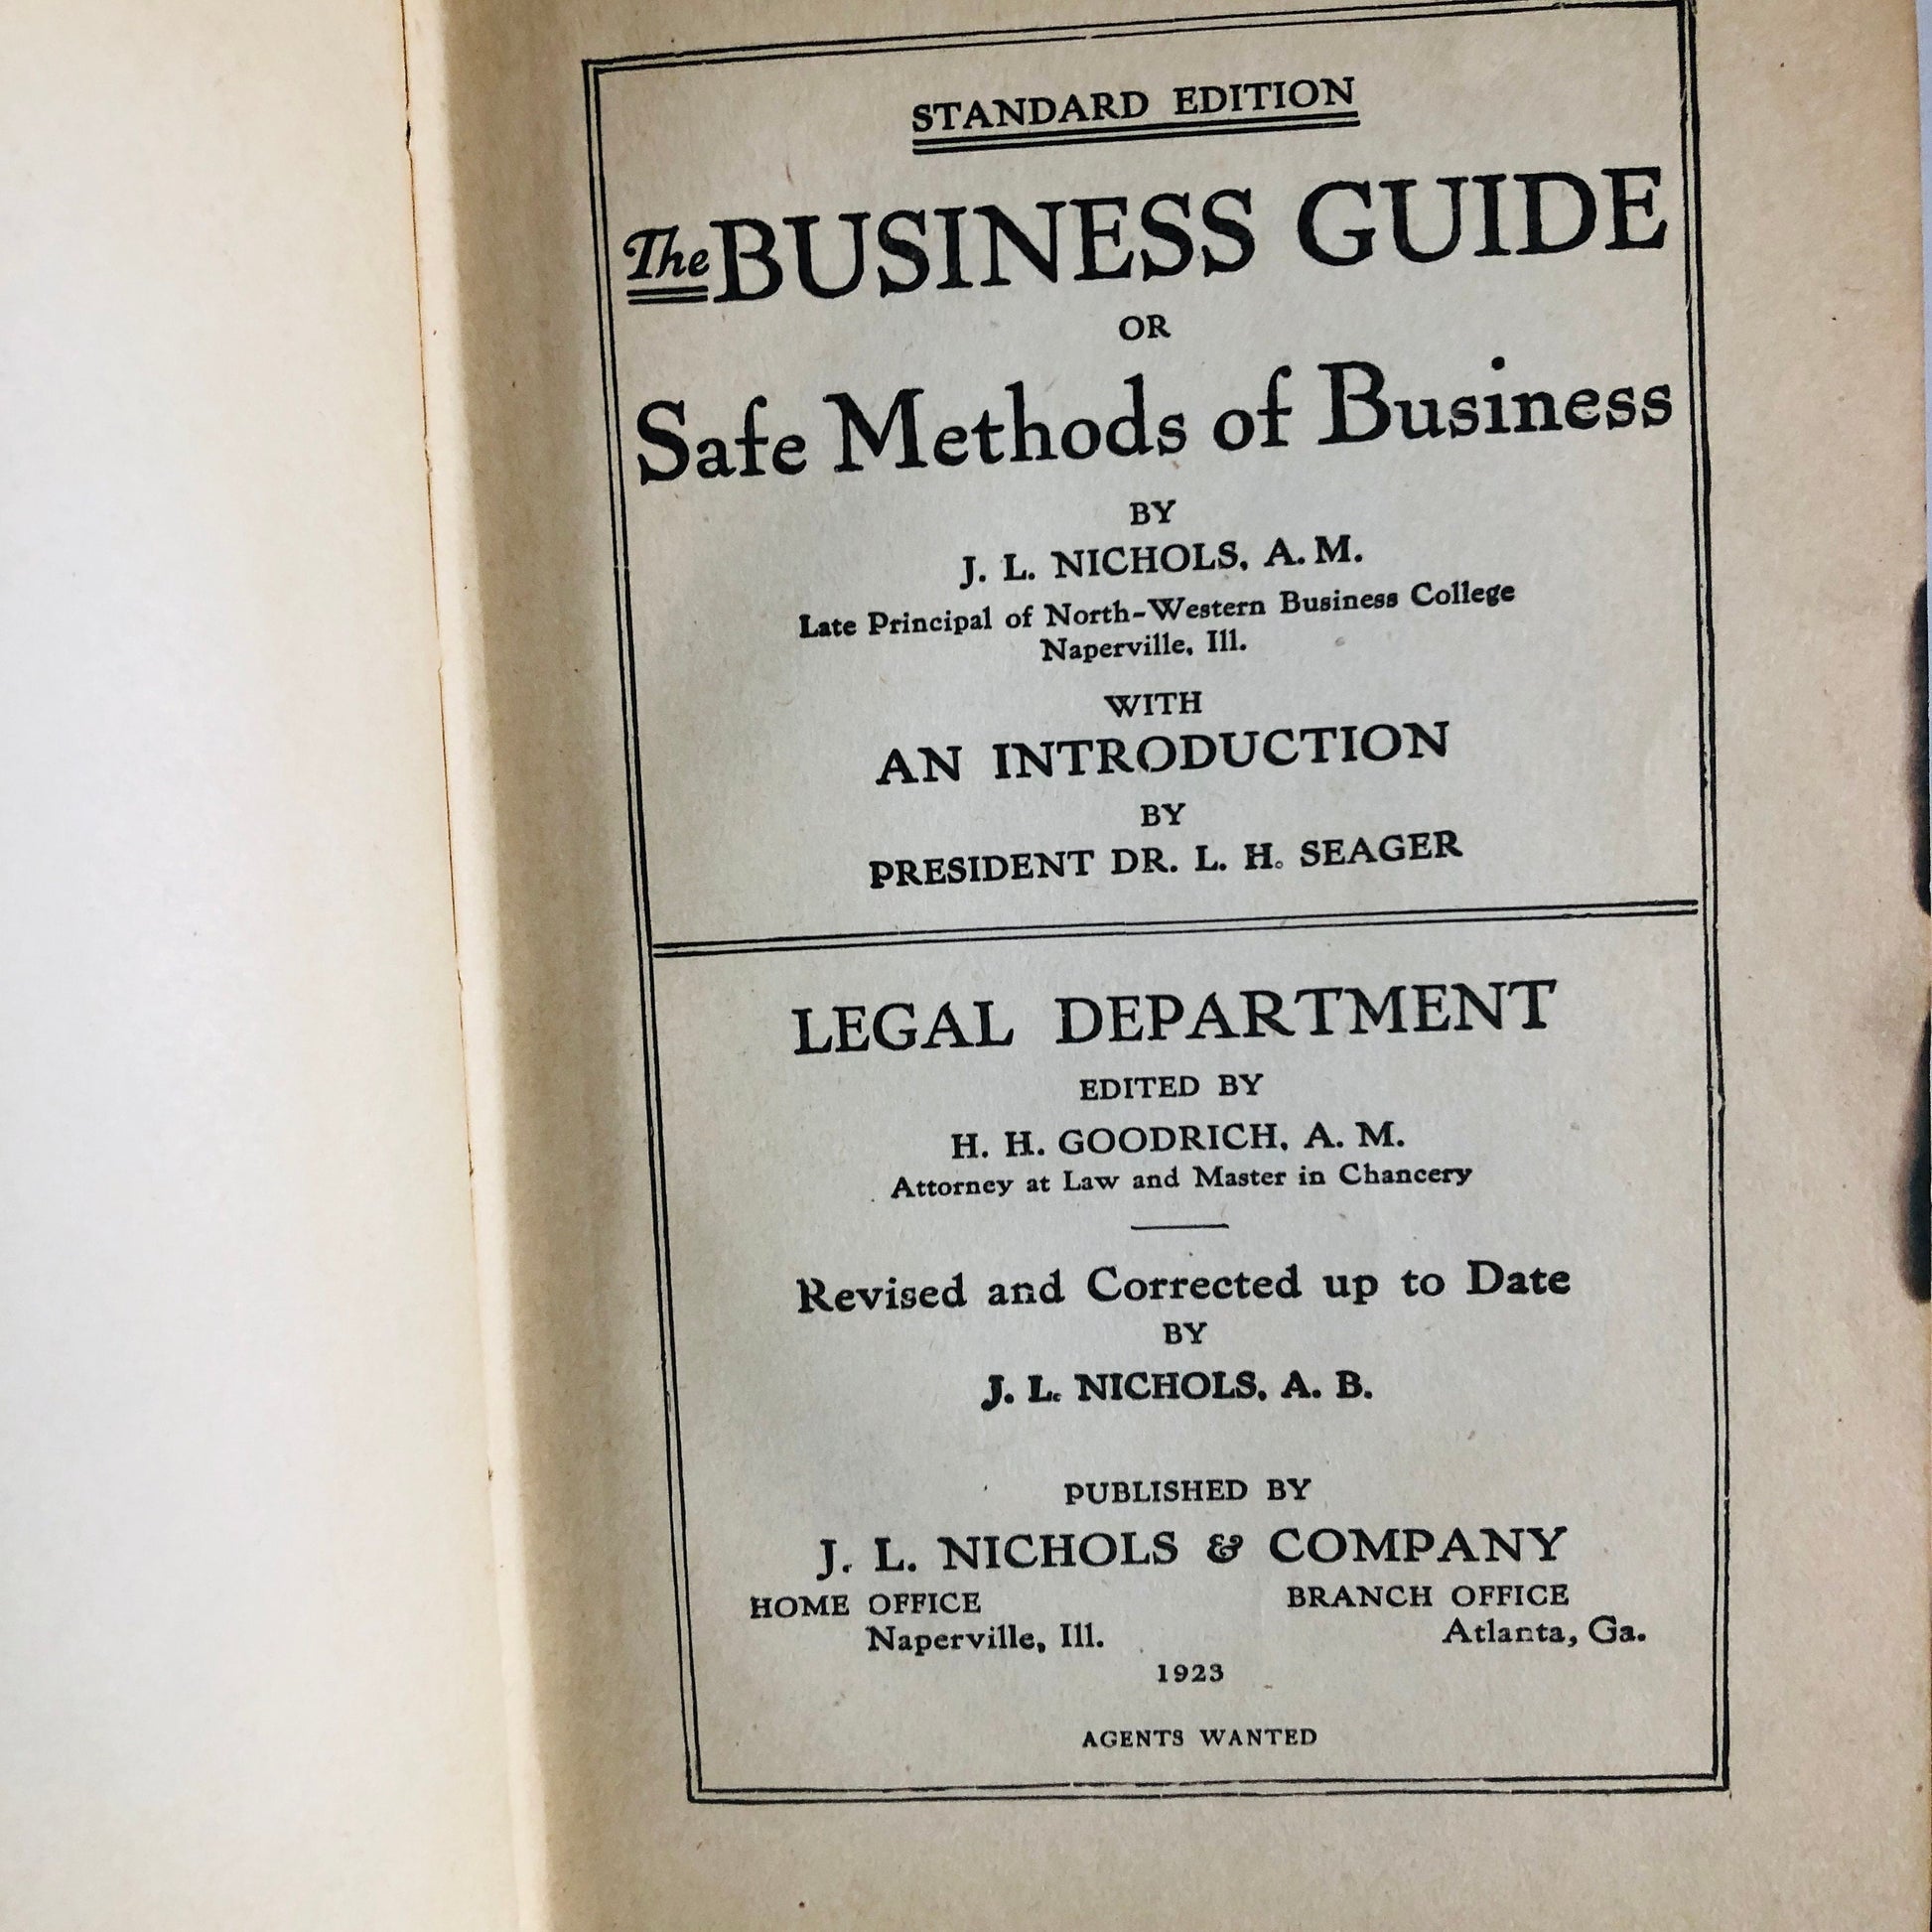 Safe Methods of Business, J. L. Nichols, A.M. Copyright 1921 The Business Guide, Vintage Collectible  Book*